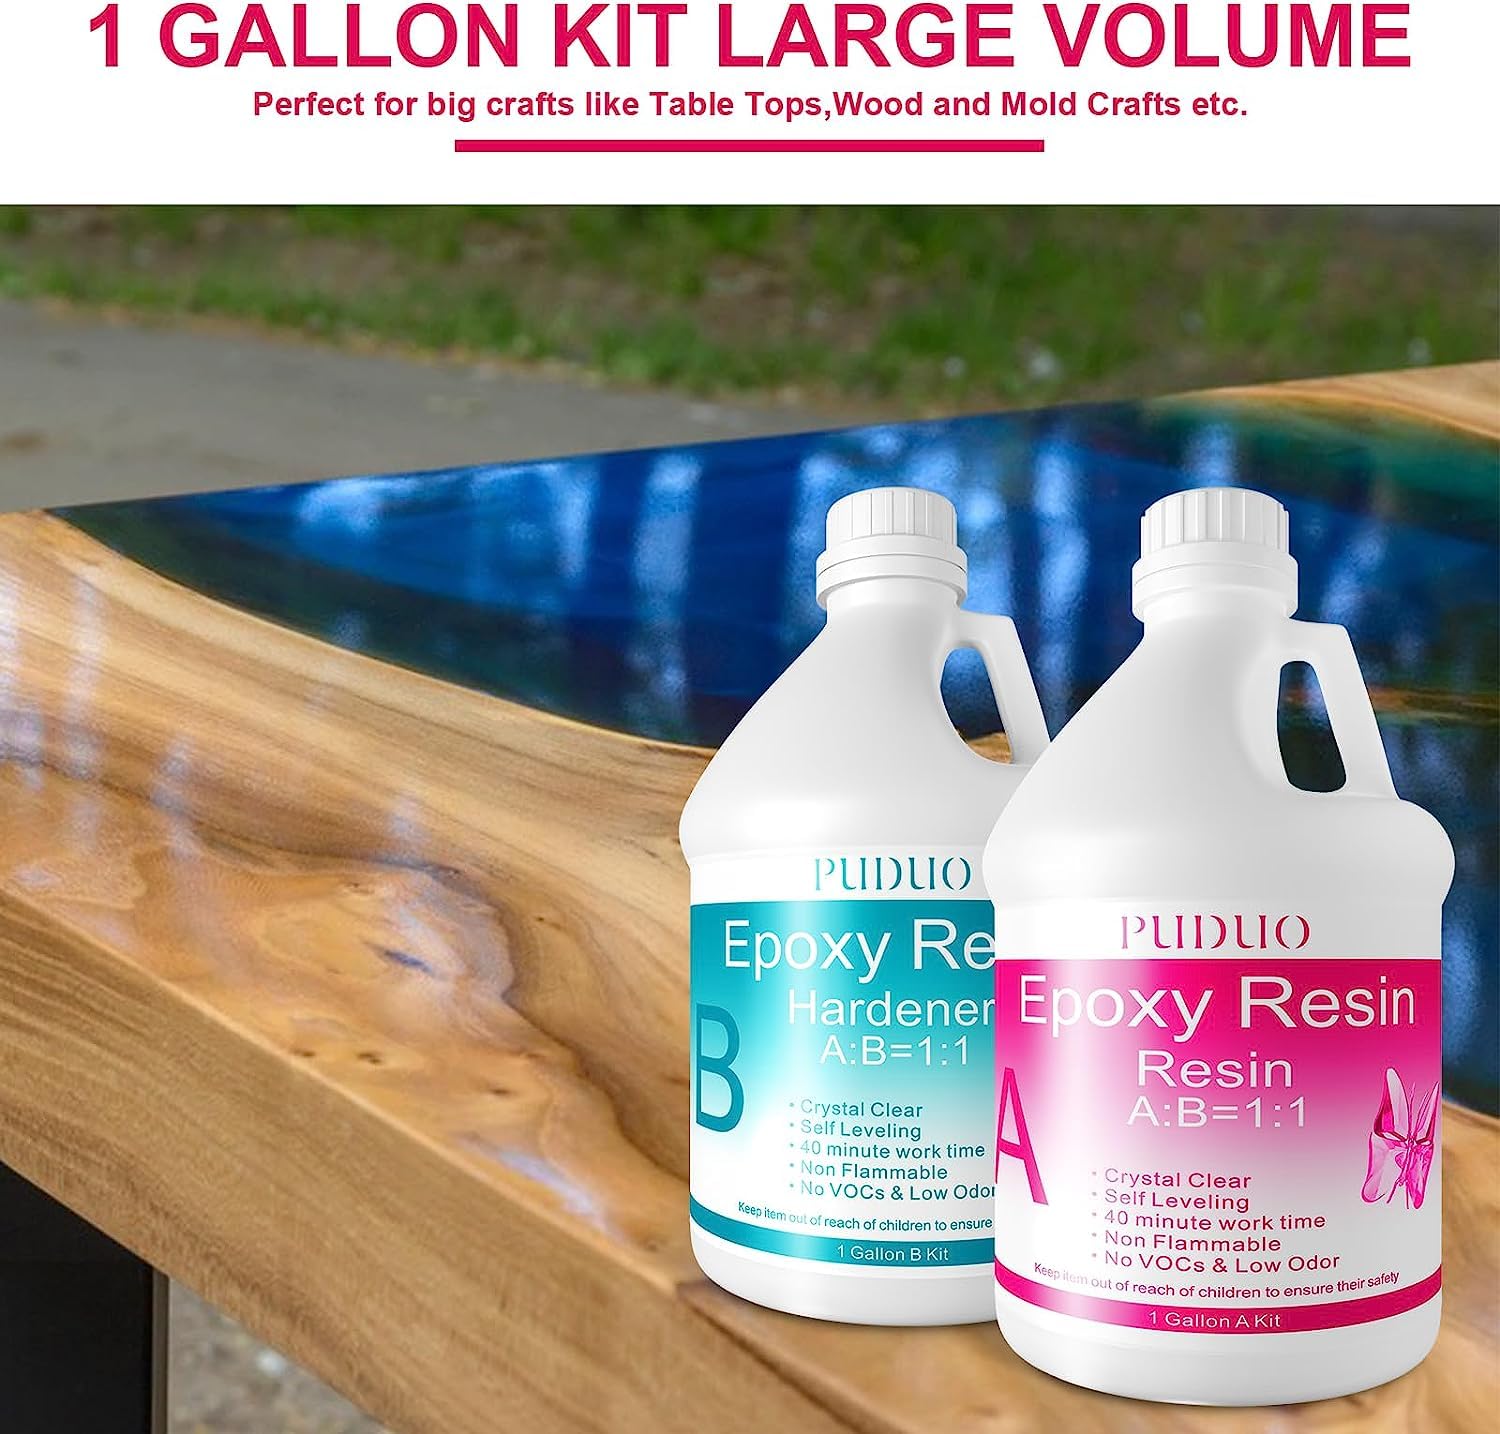 Epoxy-Resin-Crystal-Clear-Art 1 Gallon Kit for Coating, Casting, Resin Art, Jewelry, Tabletop, Bar Top, Live Edge Tables, Fast Curing 2 Part Epoxy